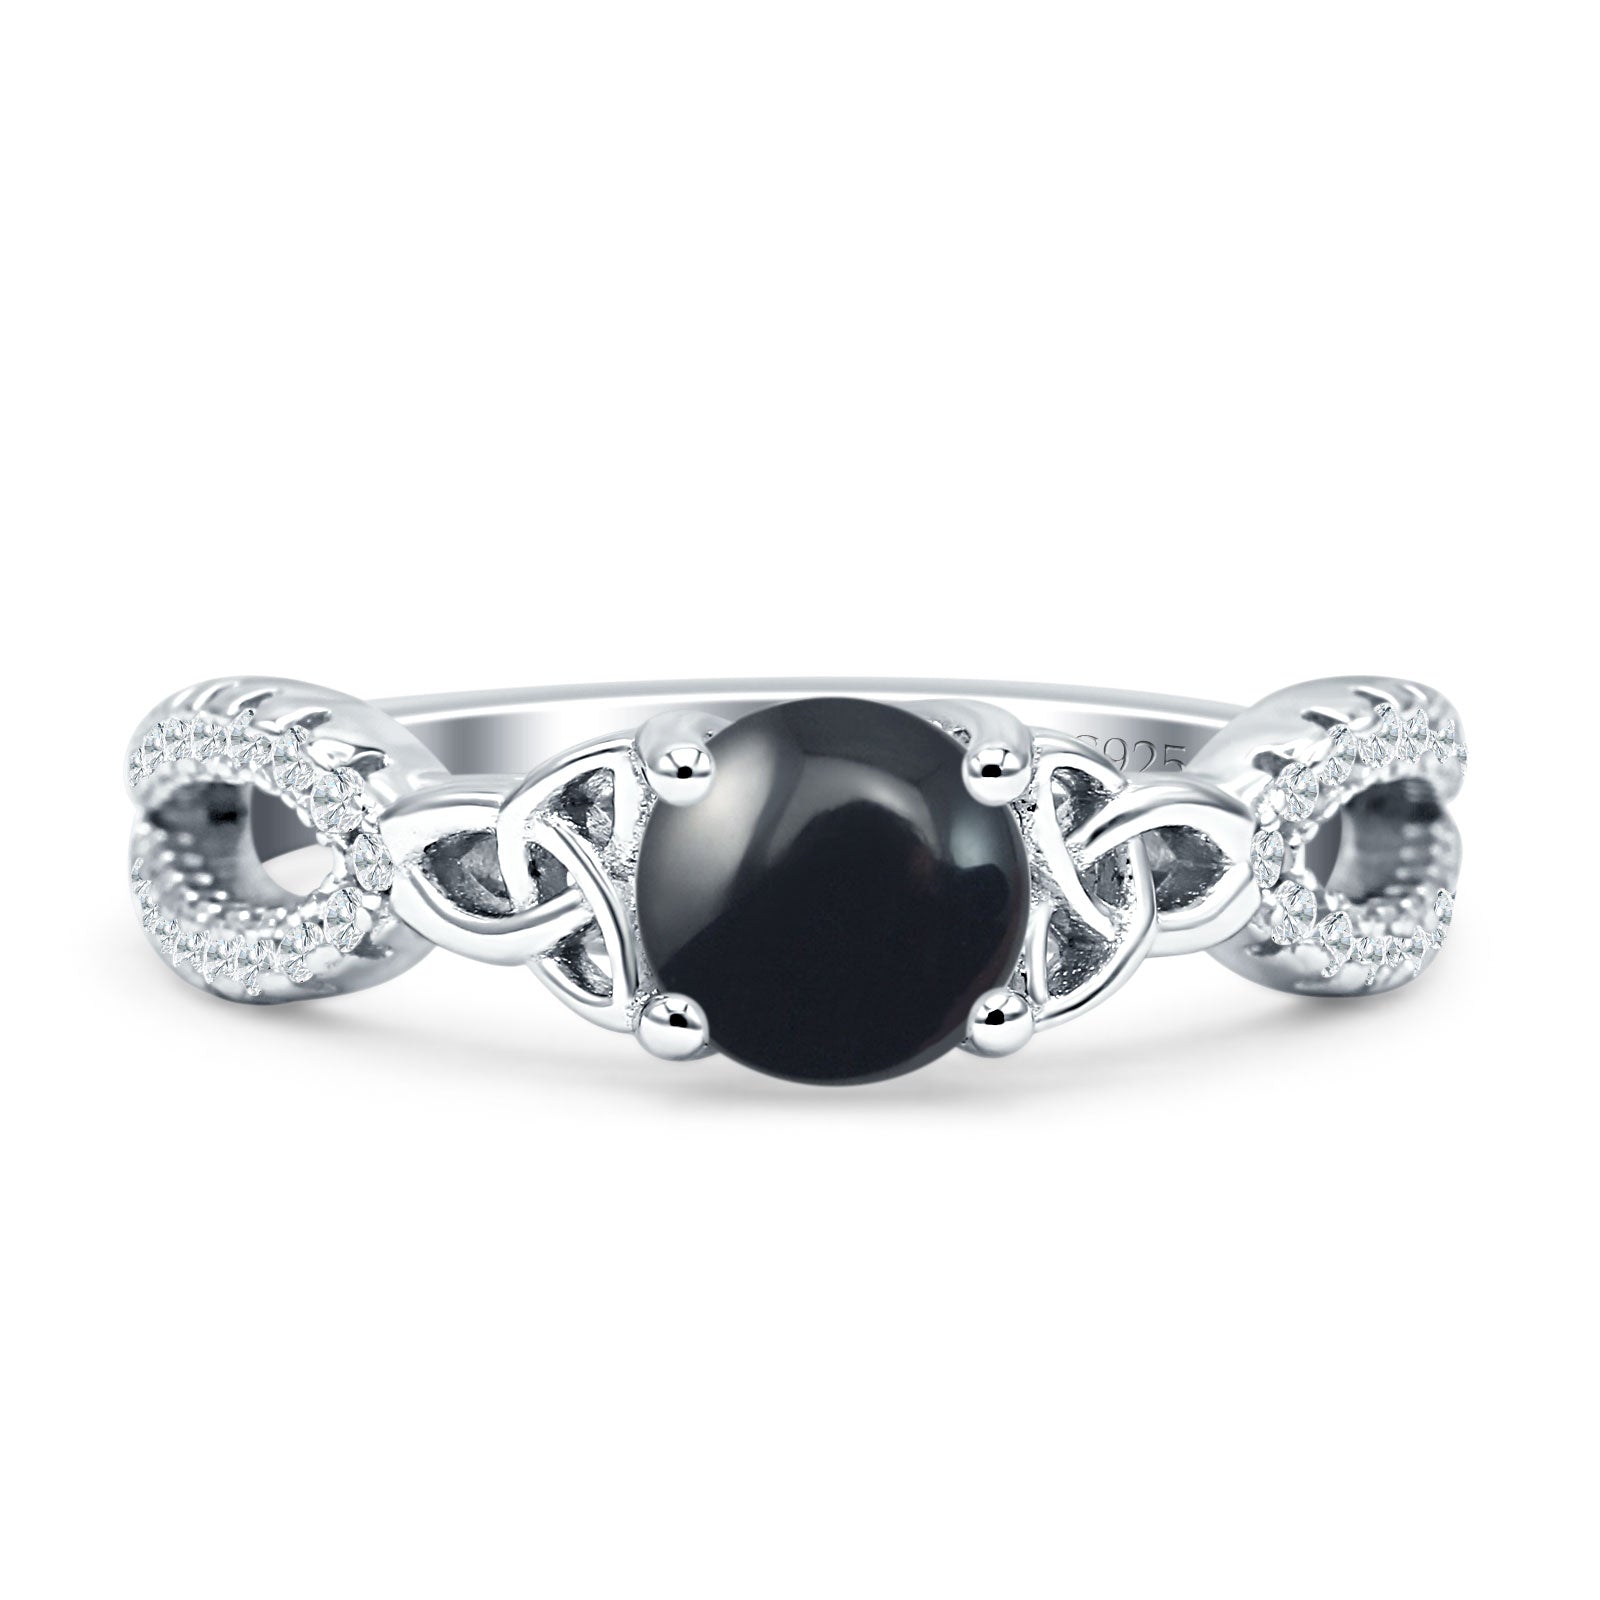 Round Cetlic Trinity Vintage Style Natural Black Onyx Ring 925 Sterling Silver